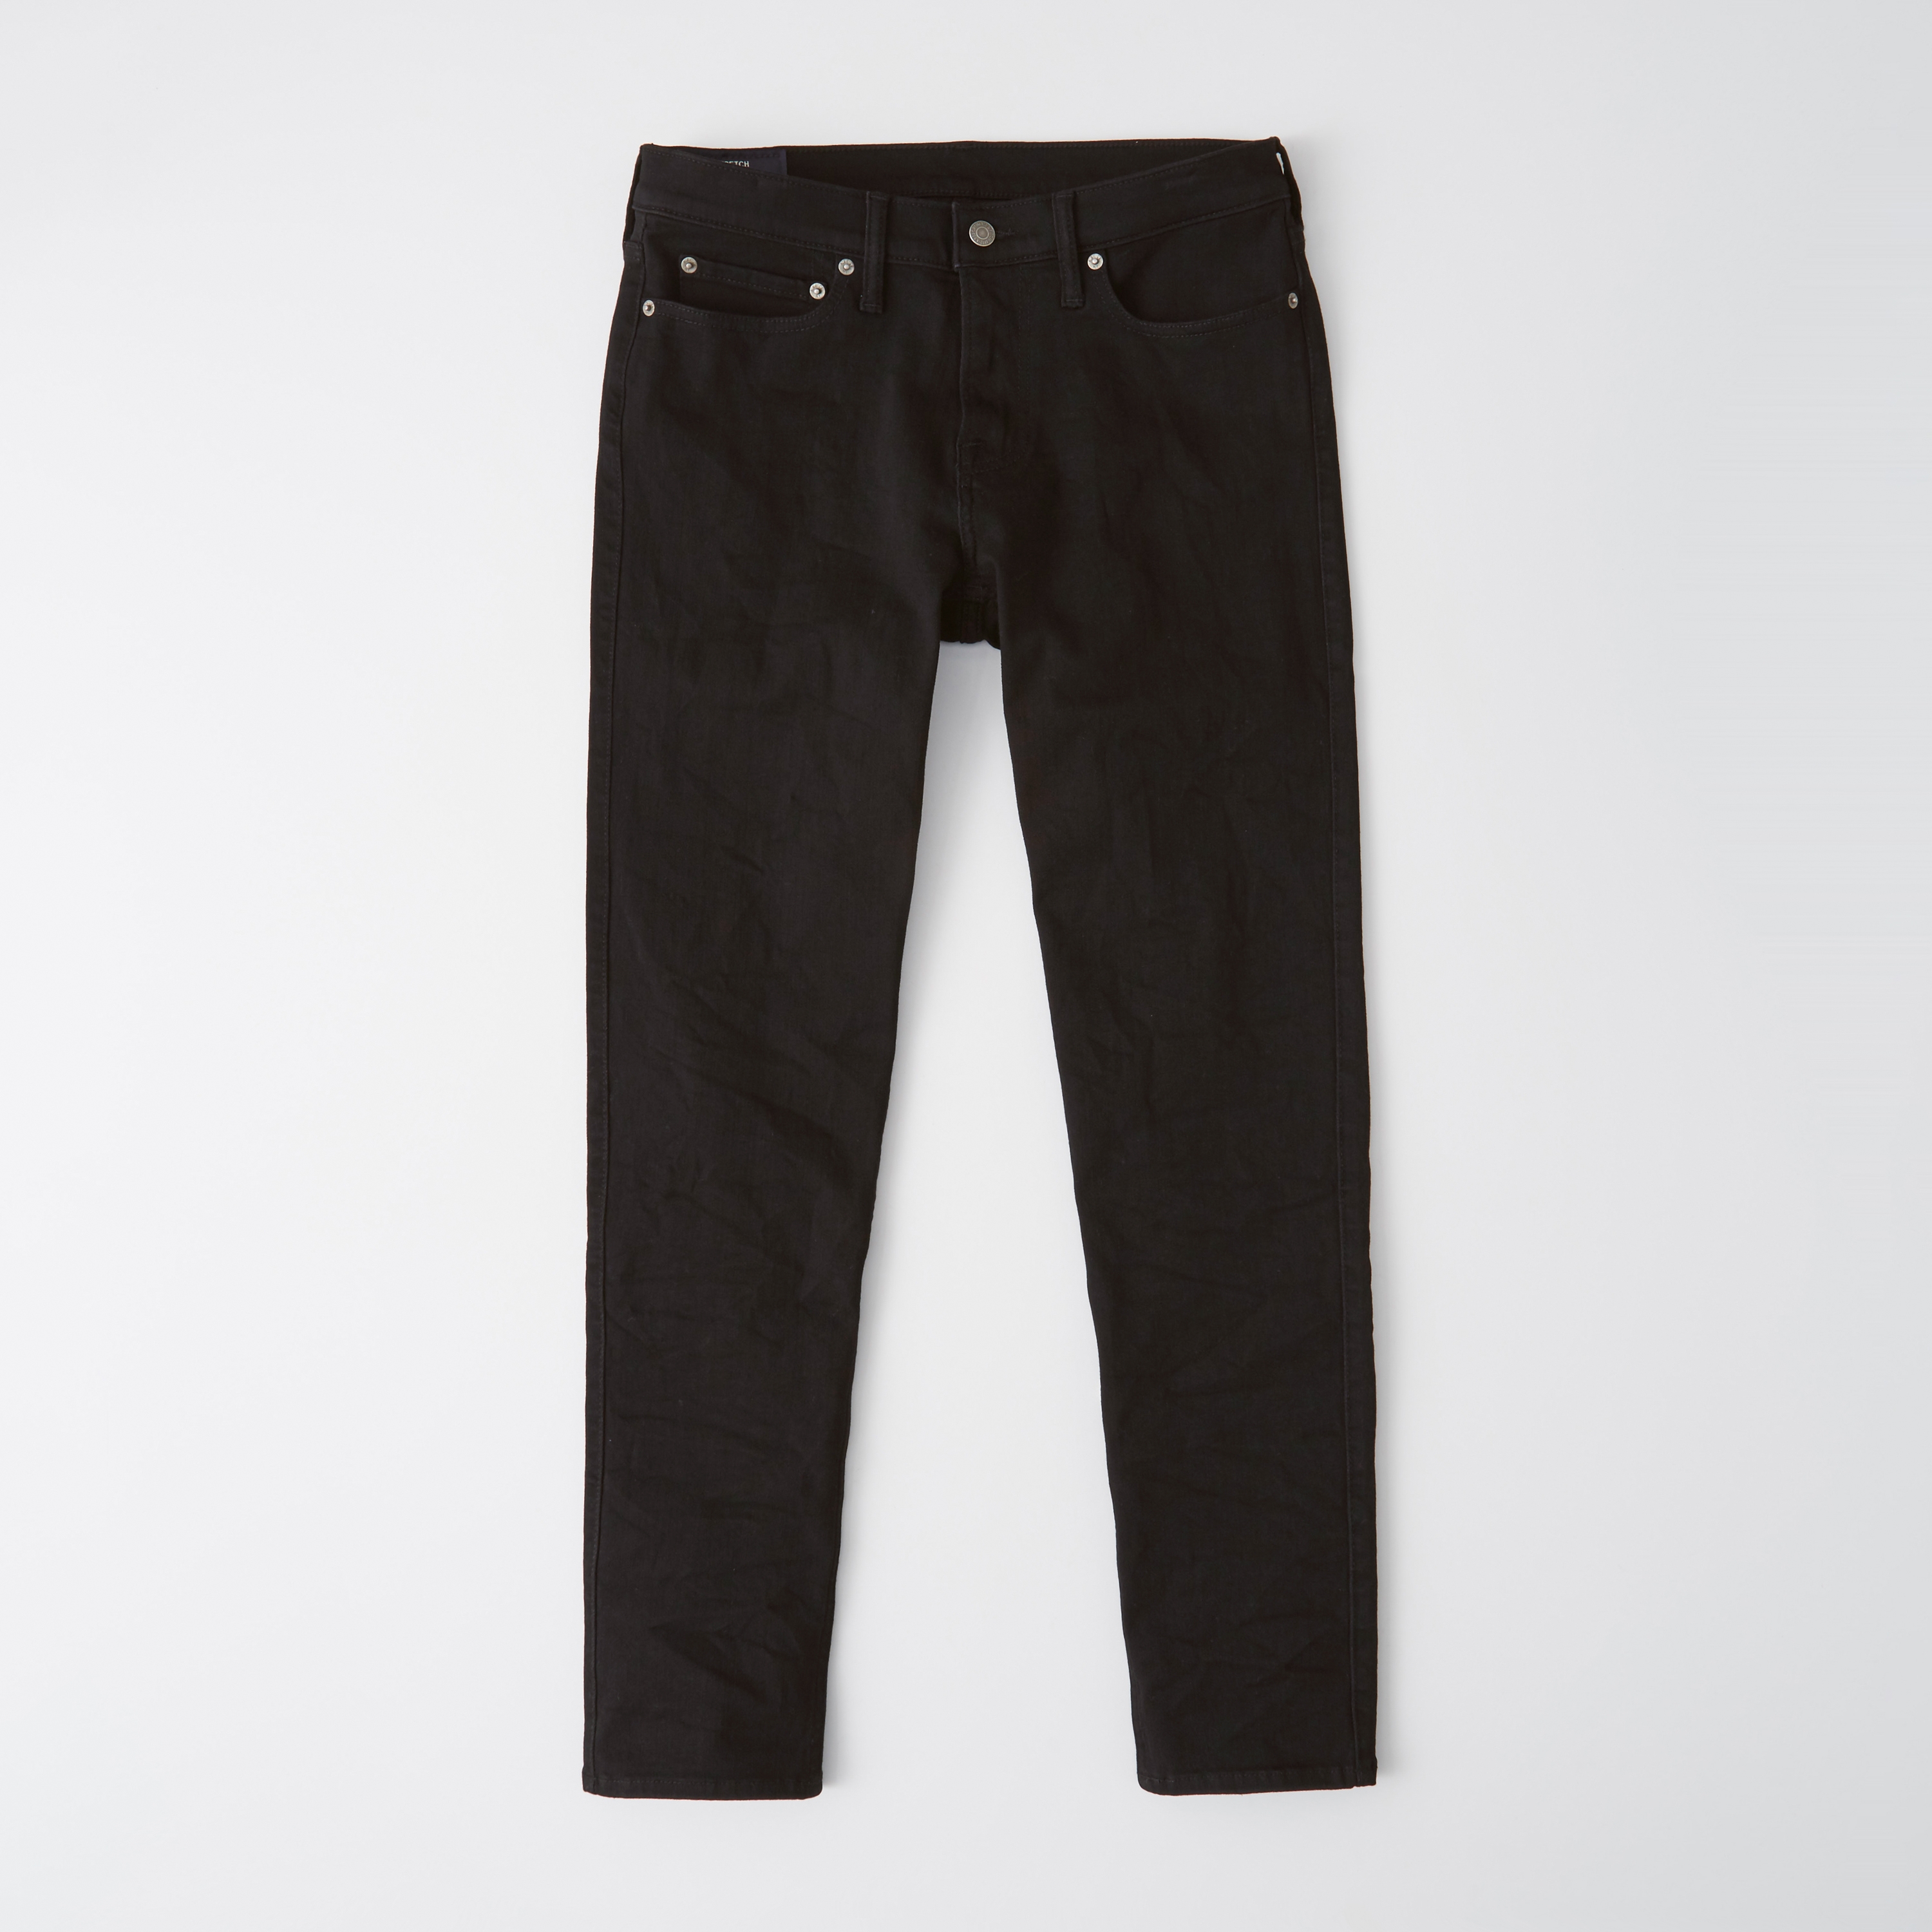 abercrombie fitch Athletic Skinny Pants